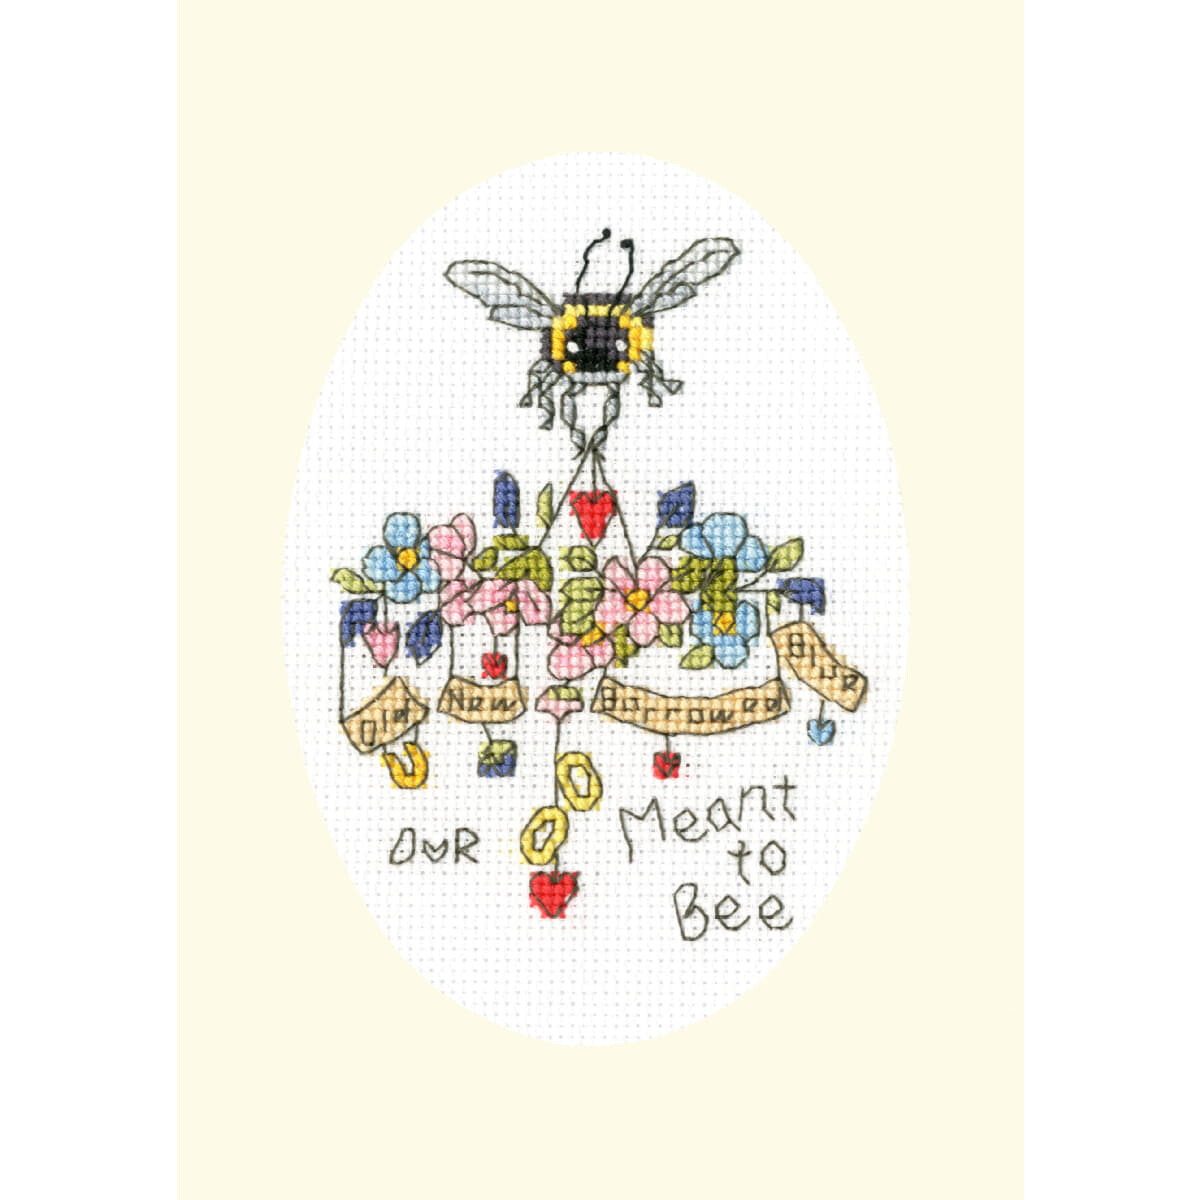 An enchanting cross-stitch embroidery shows a bee above a...